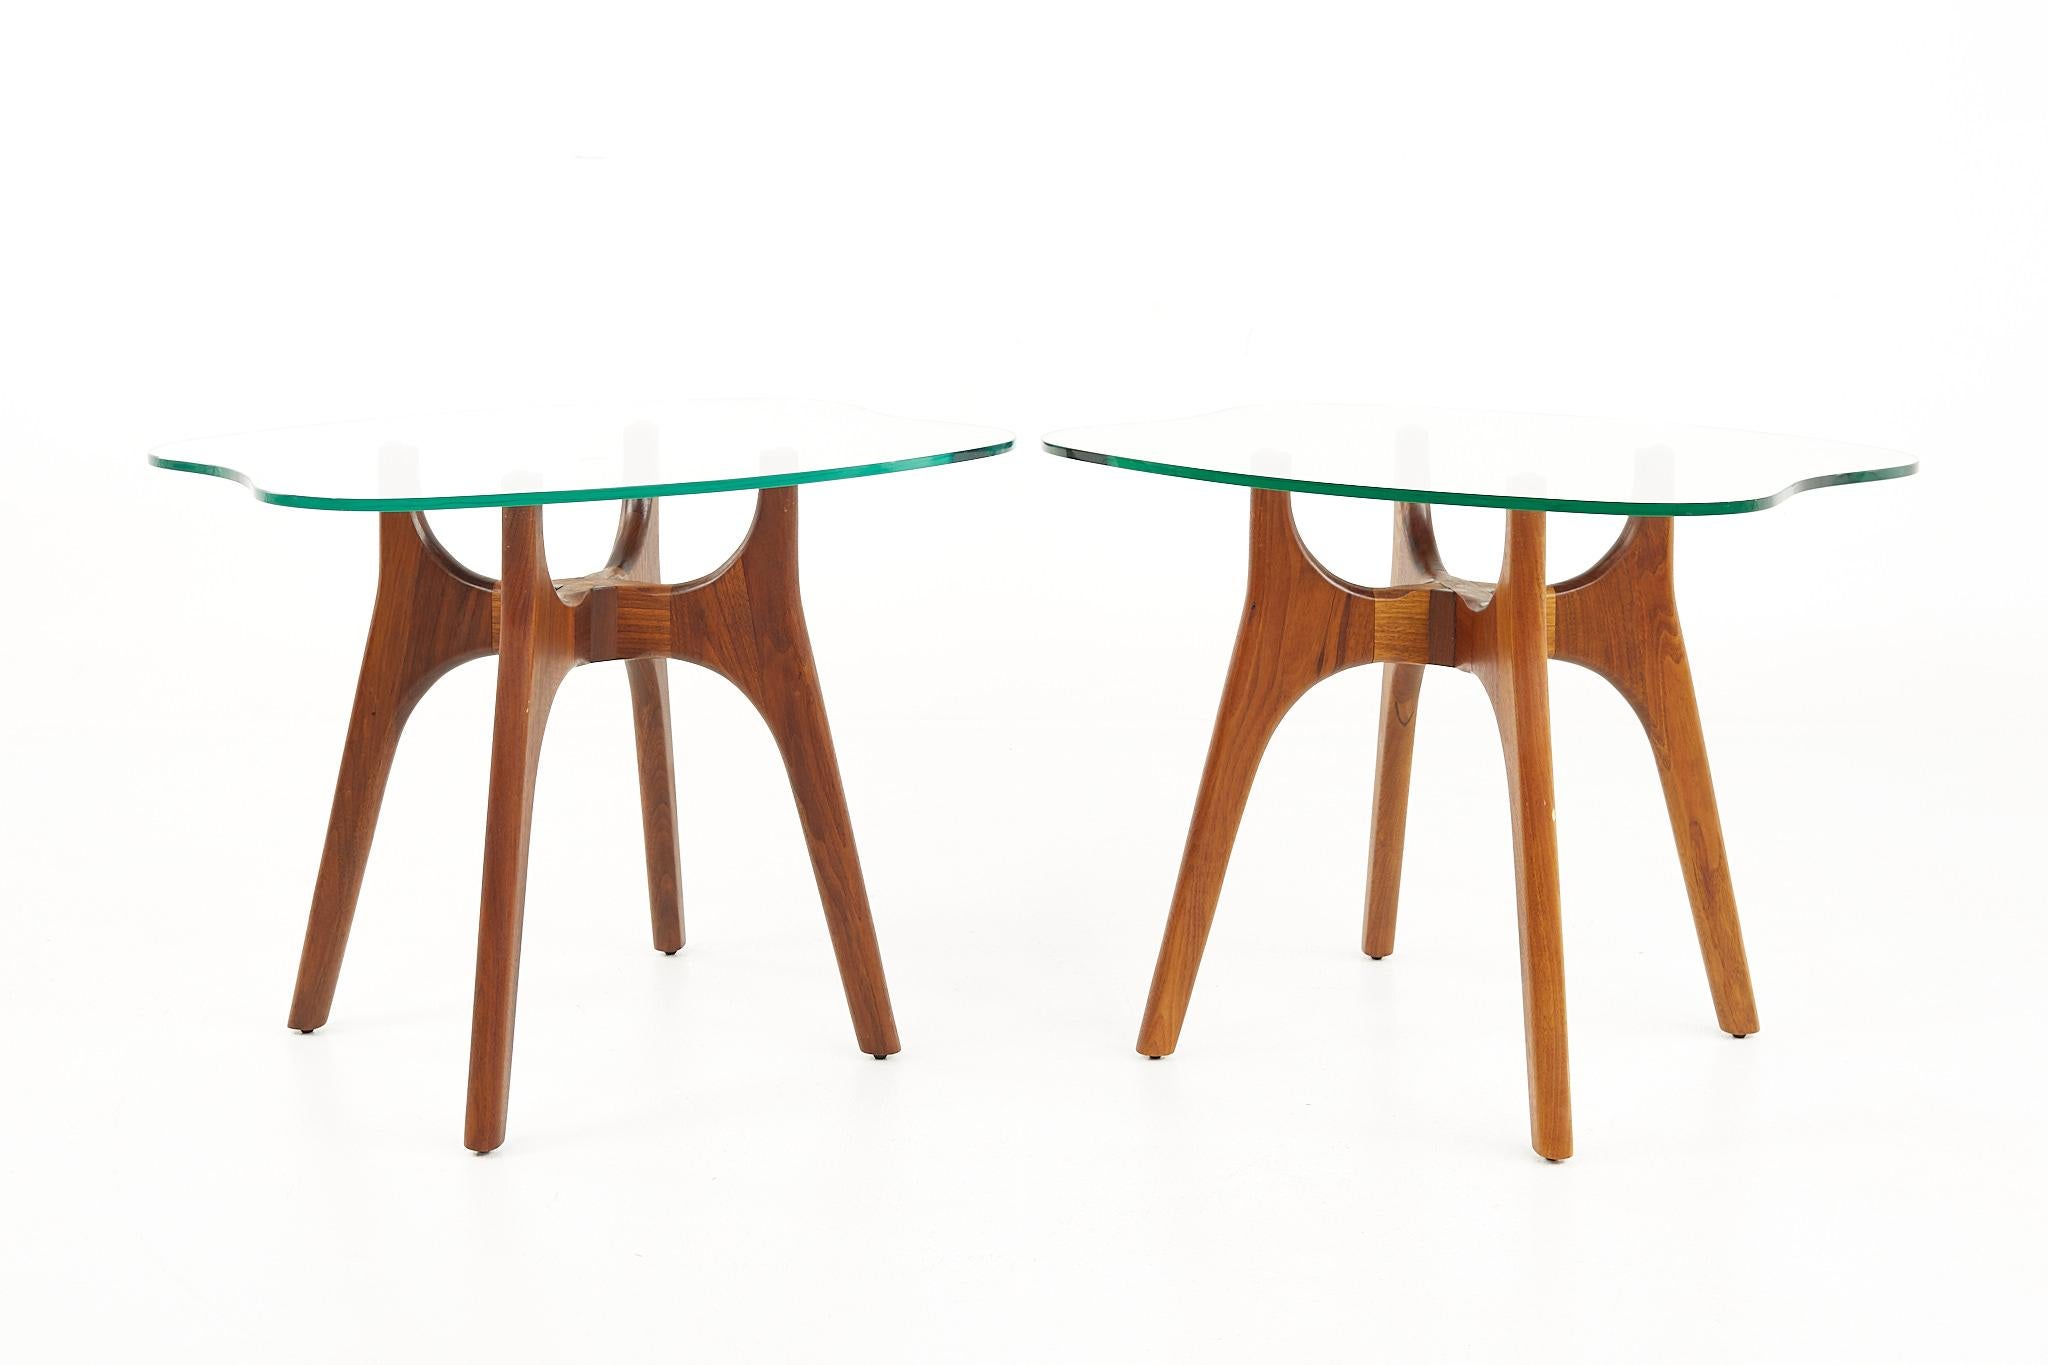 Adrian Pearsall style mid century walnut and glass stingray end tables - a pair

Each table measures: 25.25 wide x 21.5 deep x 20 inches high

All pieces of furniture can be had in what we call restored vintage condition. That means the piece is